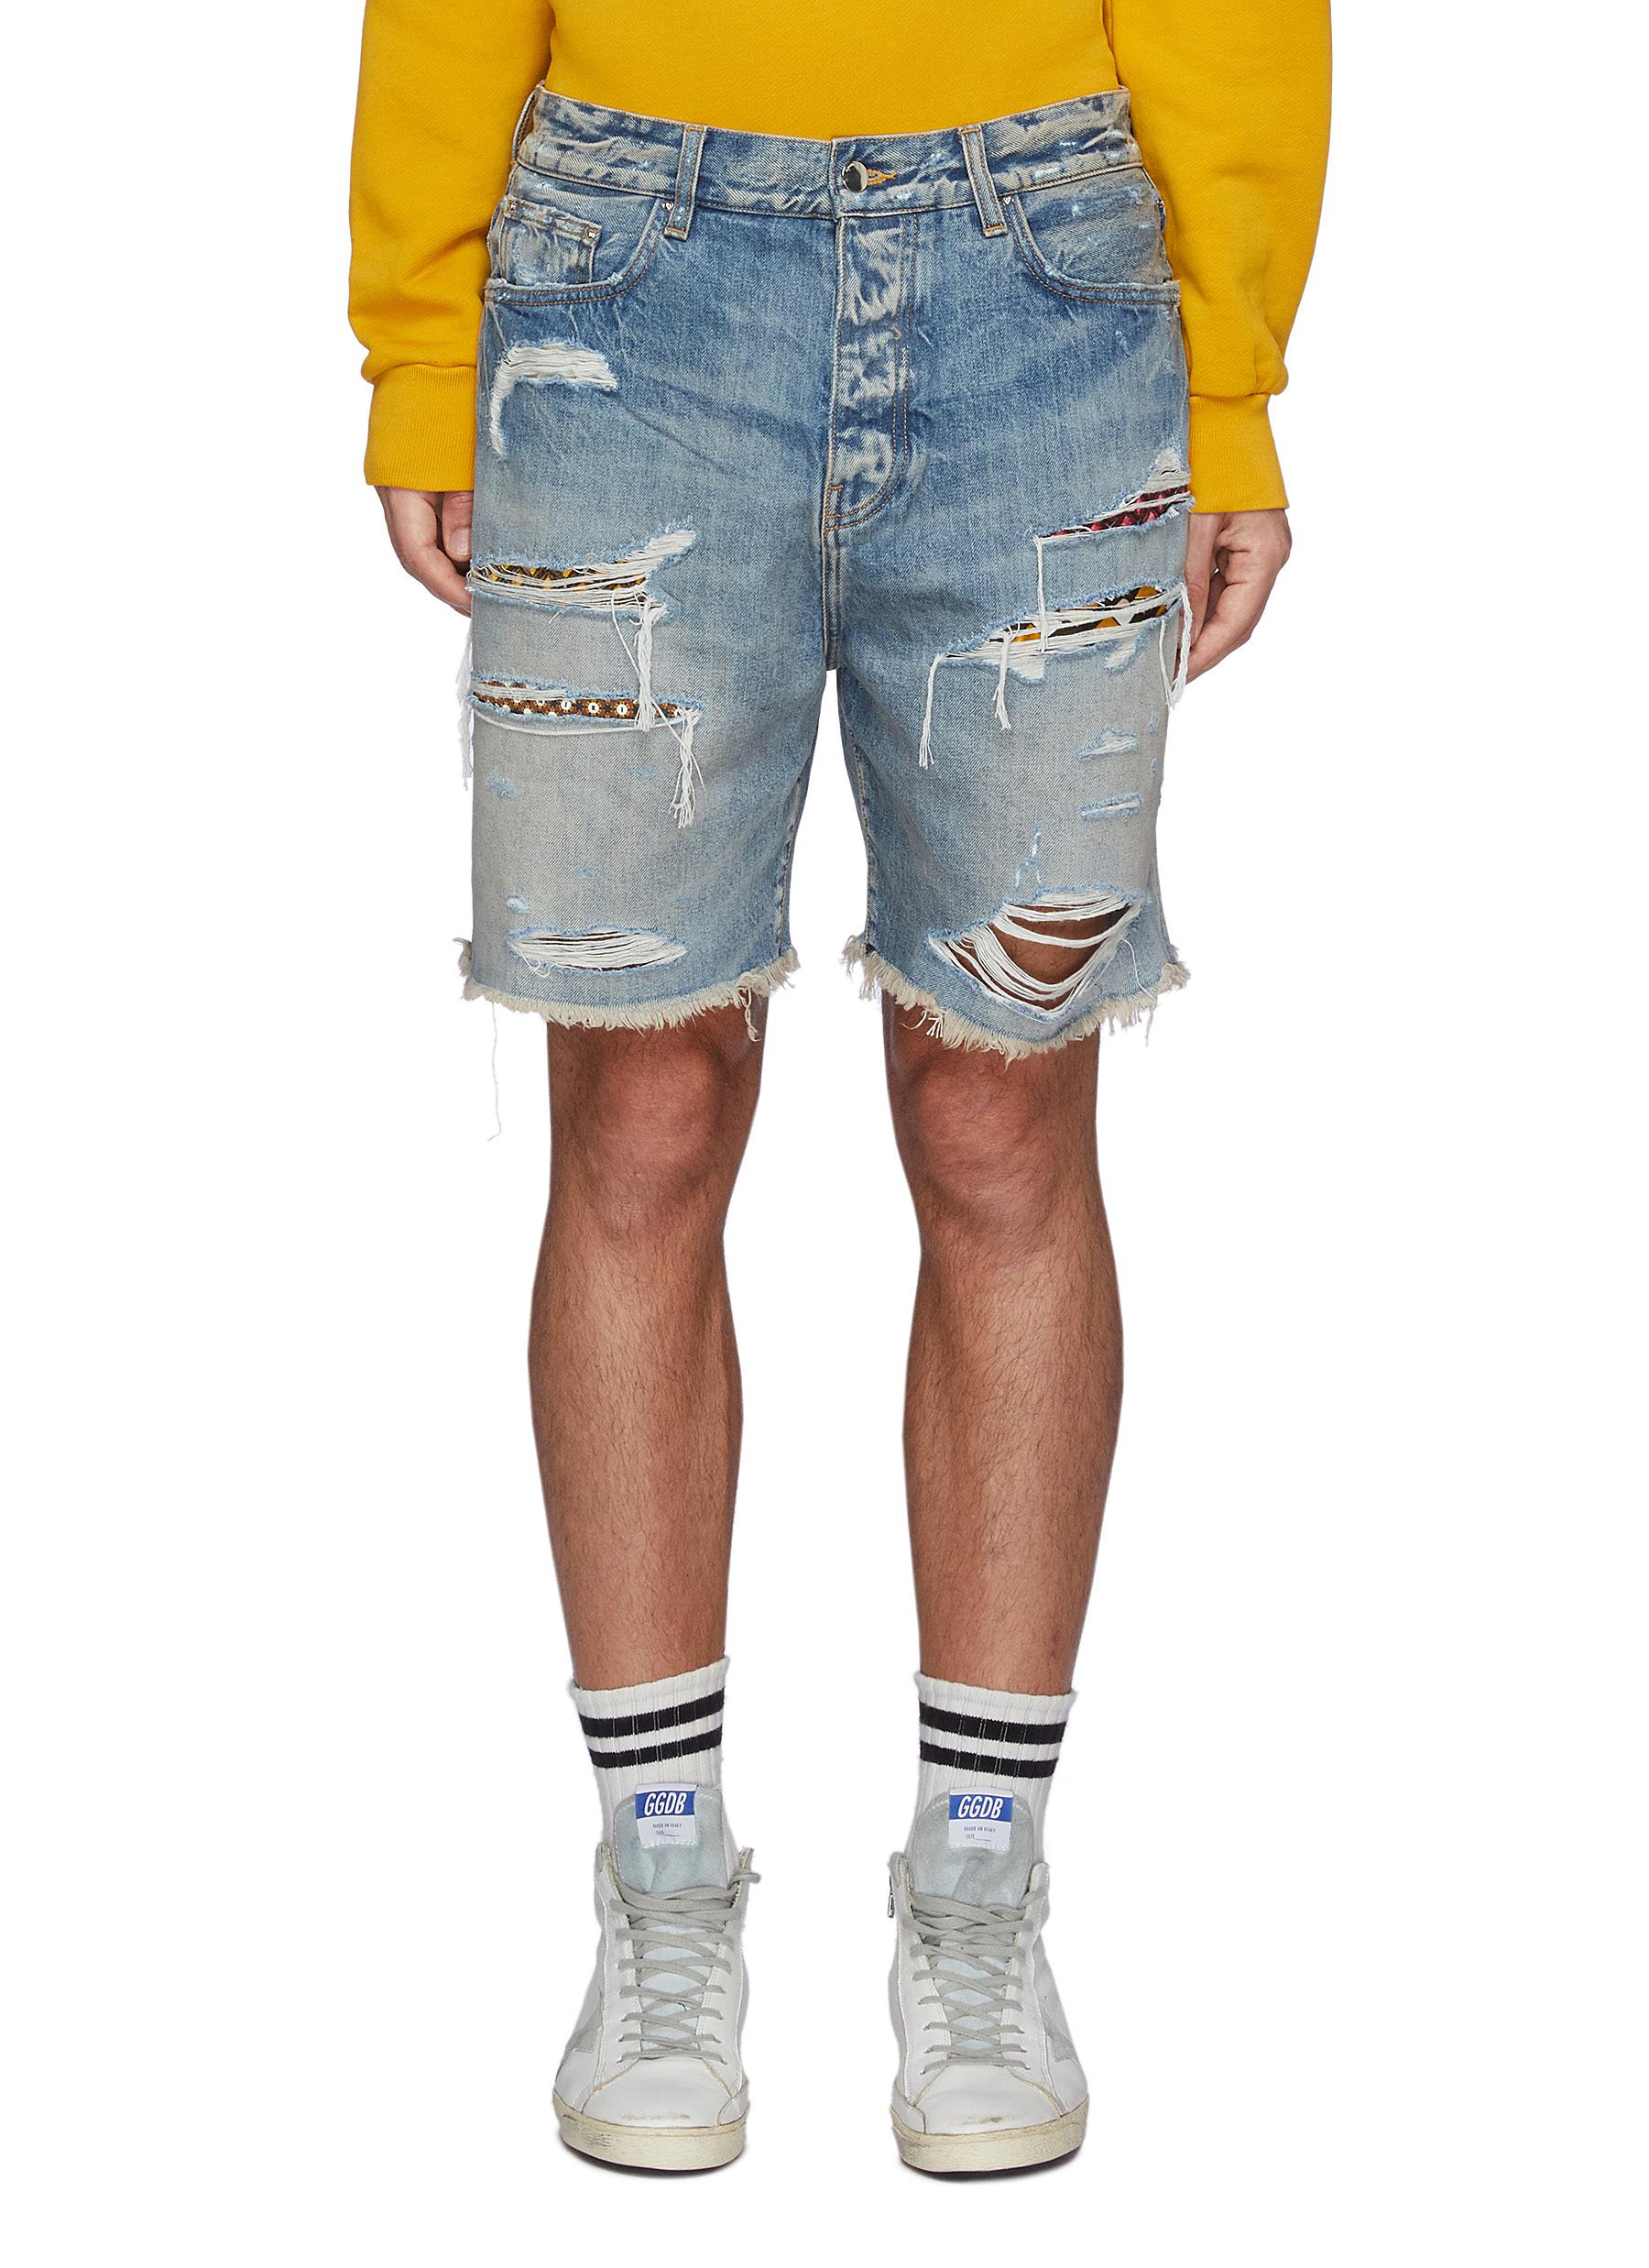 Patchwork Ripped Light Washed Denim Shorts